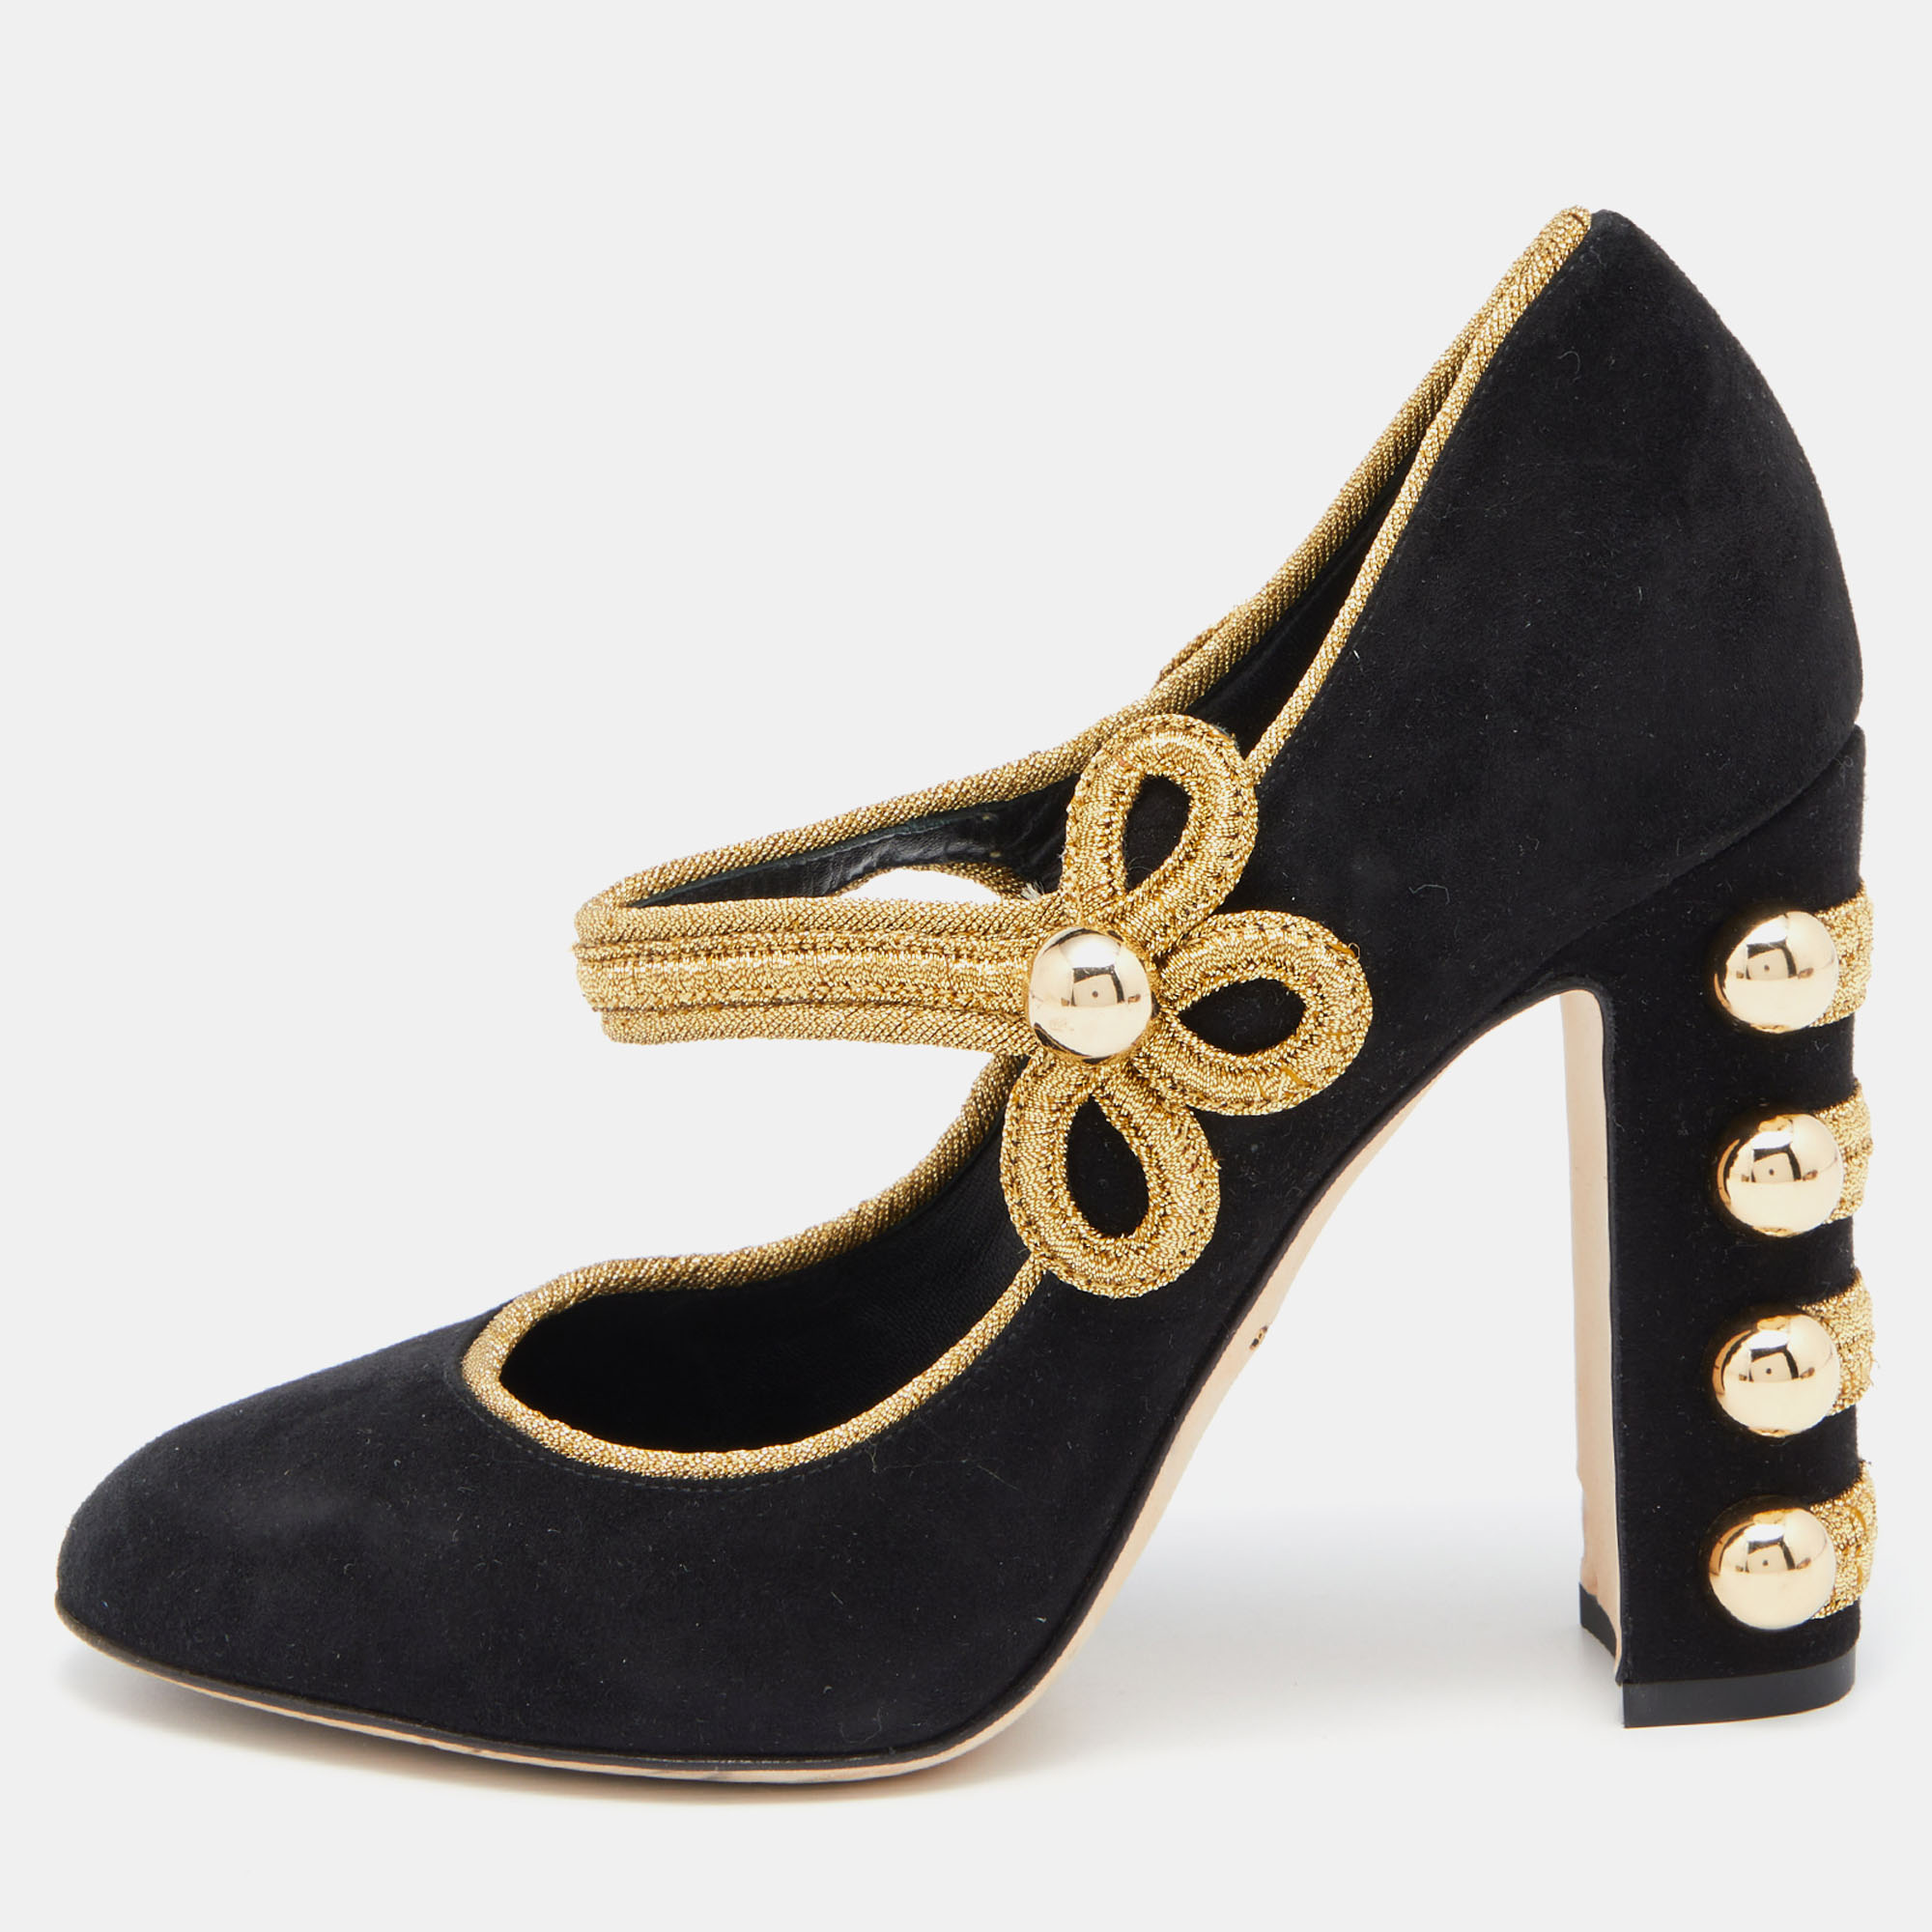 Dolce & gabbana black/gold suede military vally pumps size 37